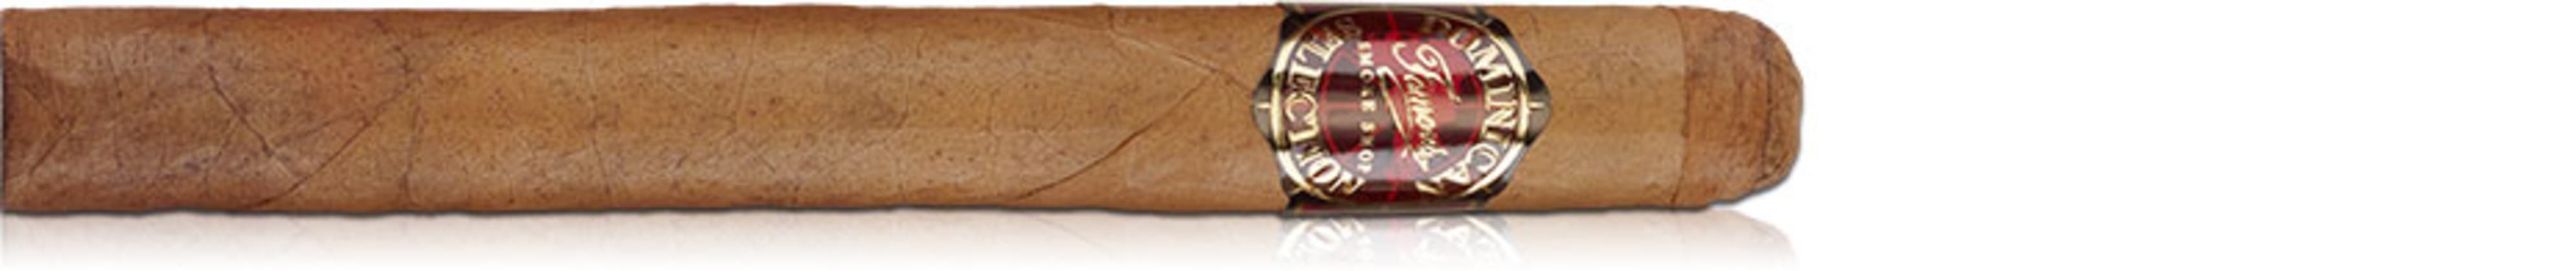 Famous Dominican Selection 4000 Churchill Single